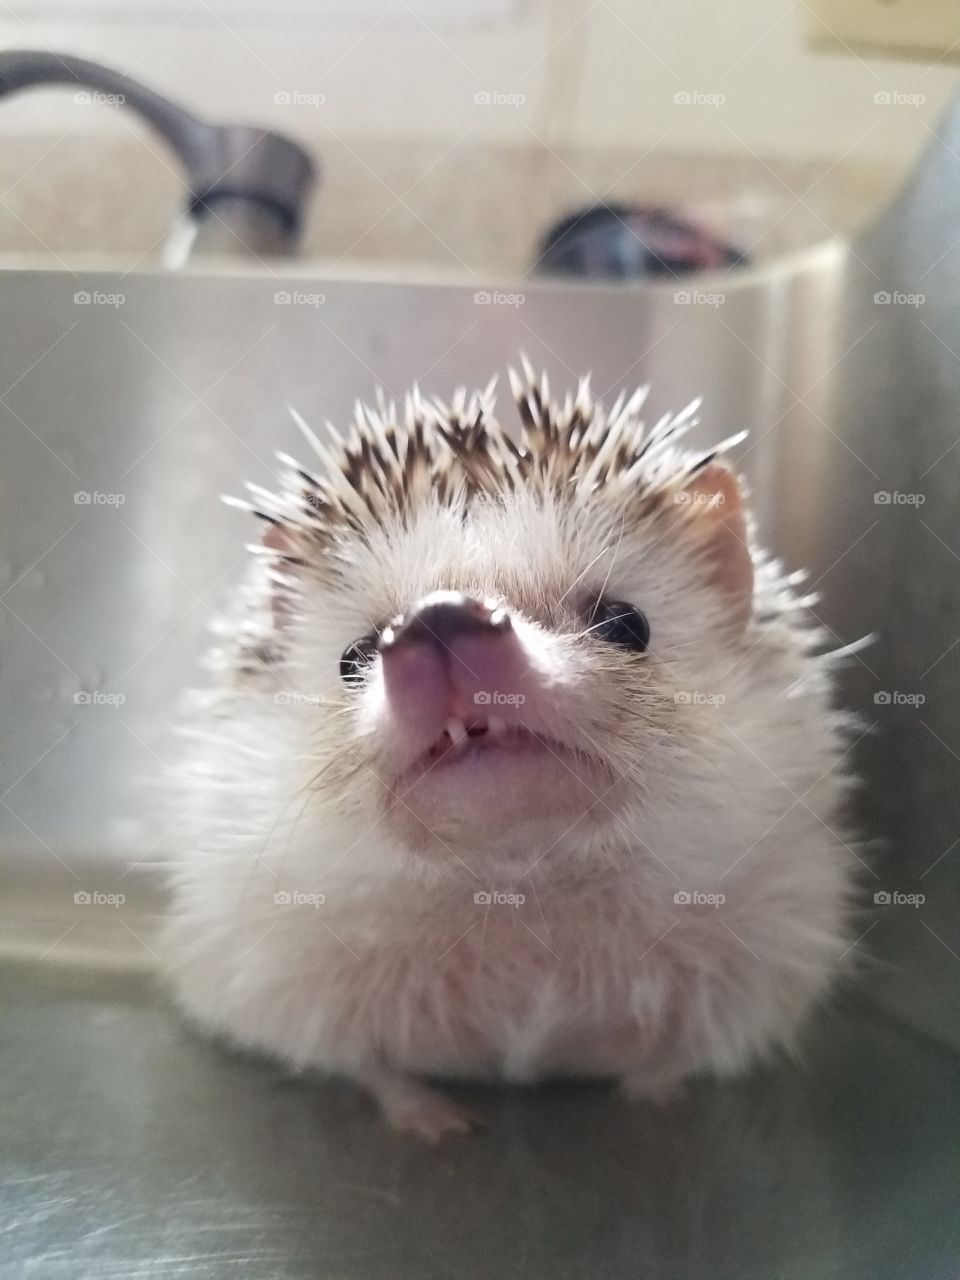 Mr. Neelix Hedgehog showing off his oh so cute tiny gapped teeth during his warm feet bath in the sink.